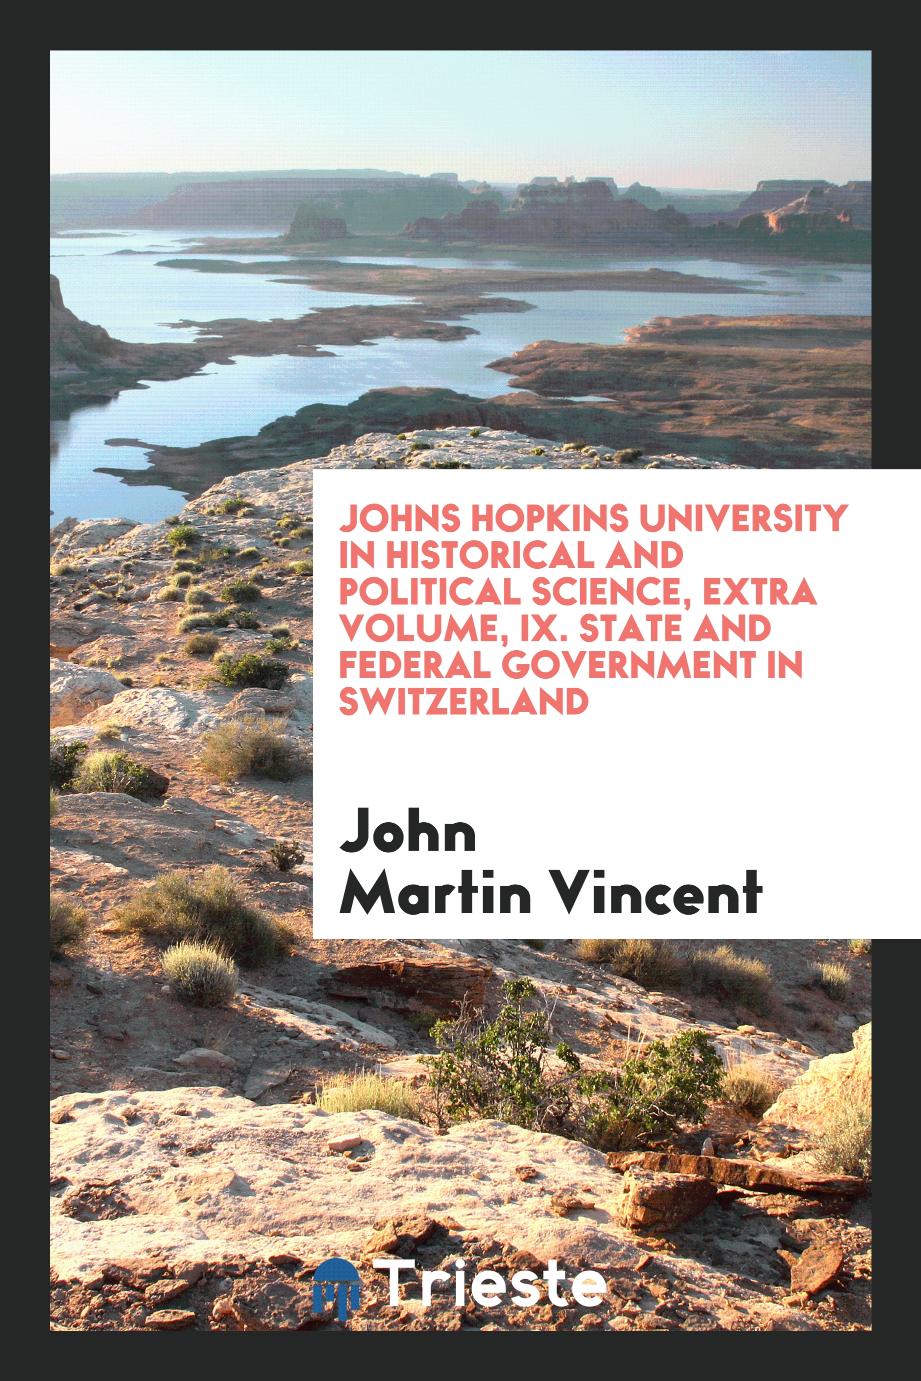 Johns Hopkins University in historical and political science, Extra volume, IX. State and federal government in Switzerland